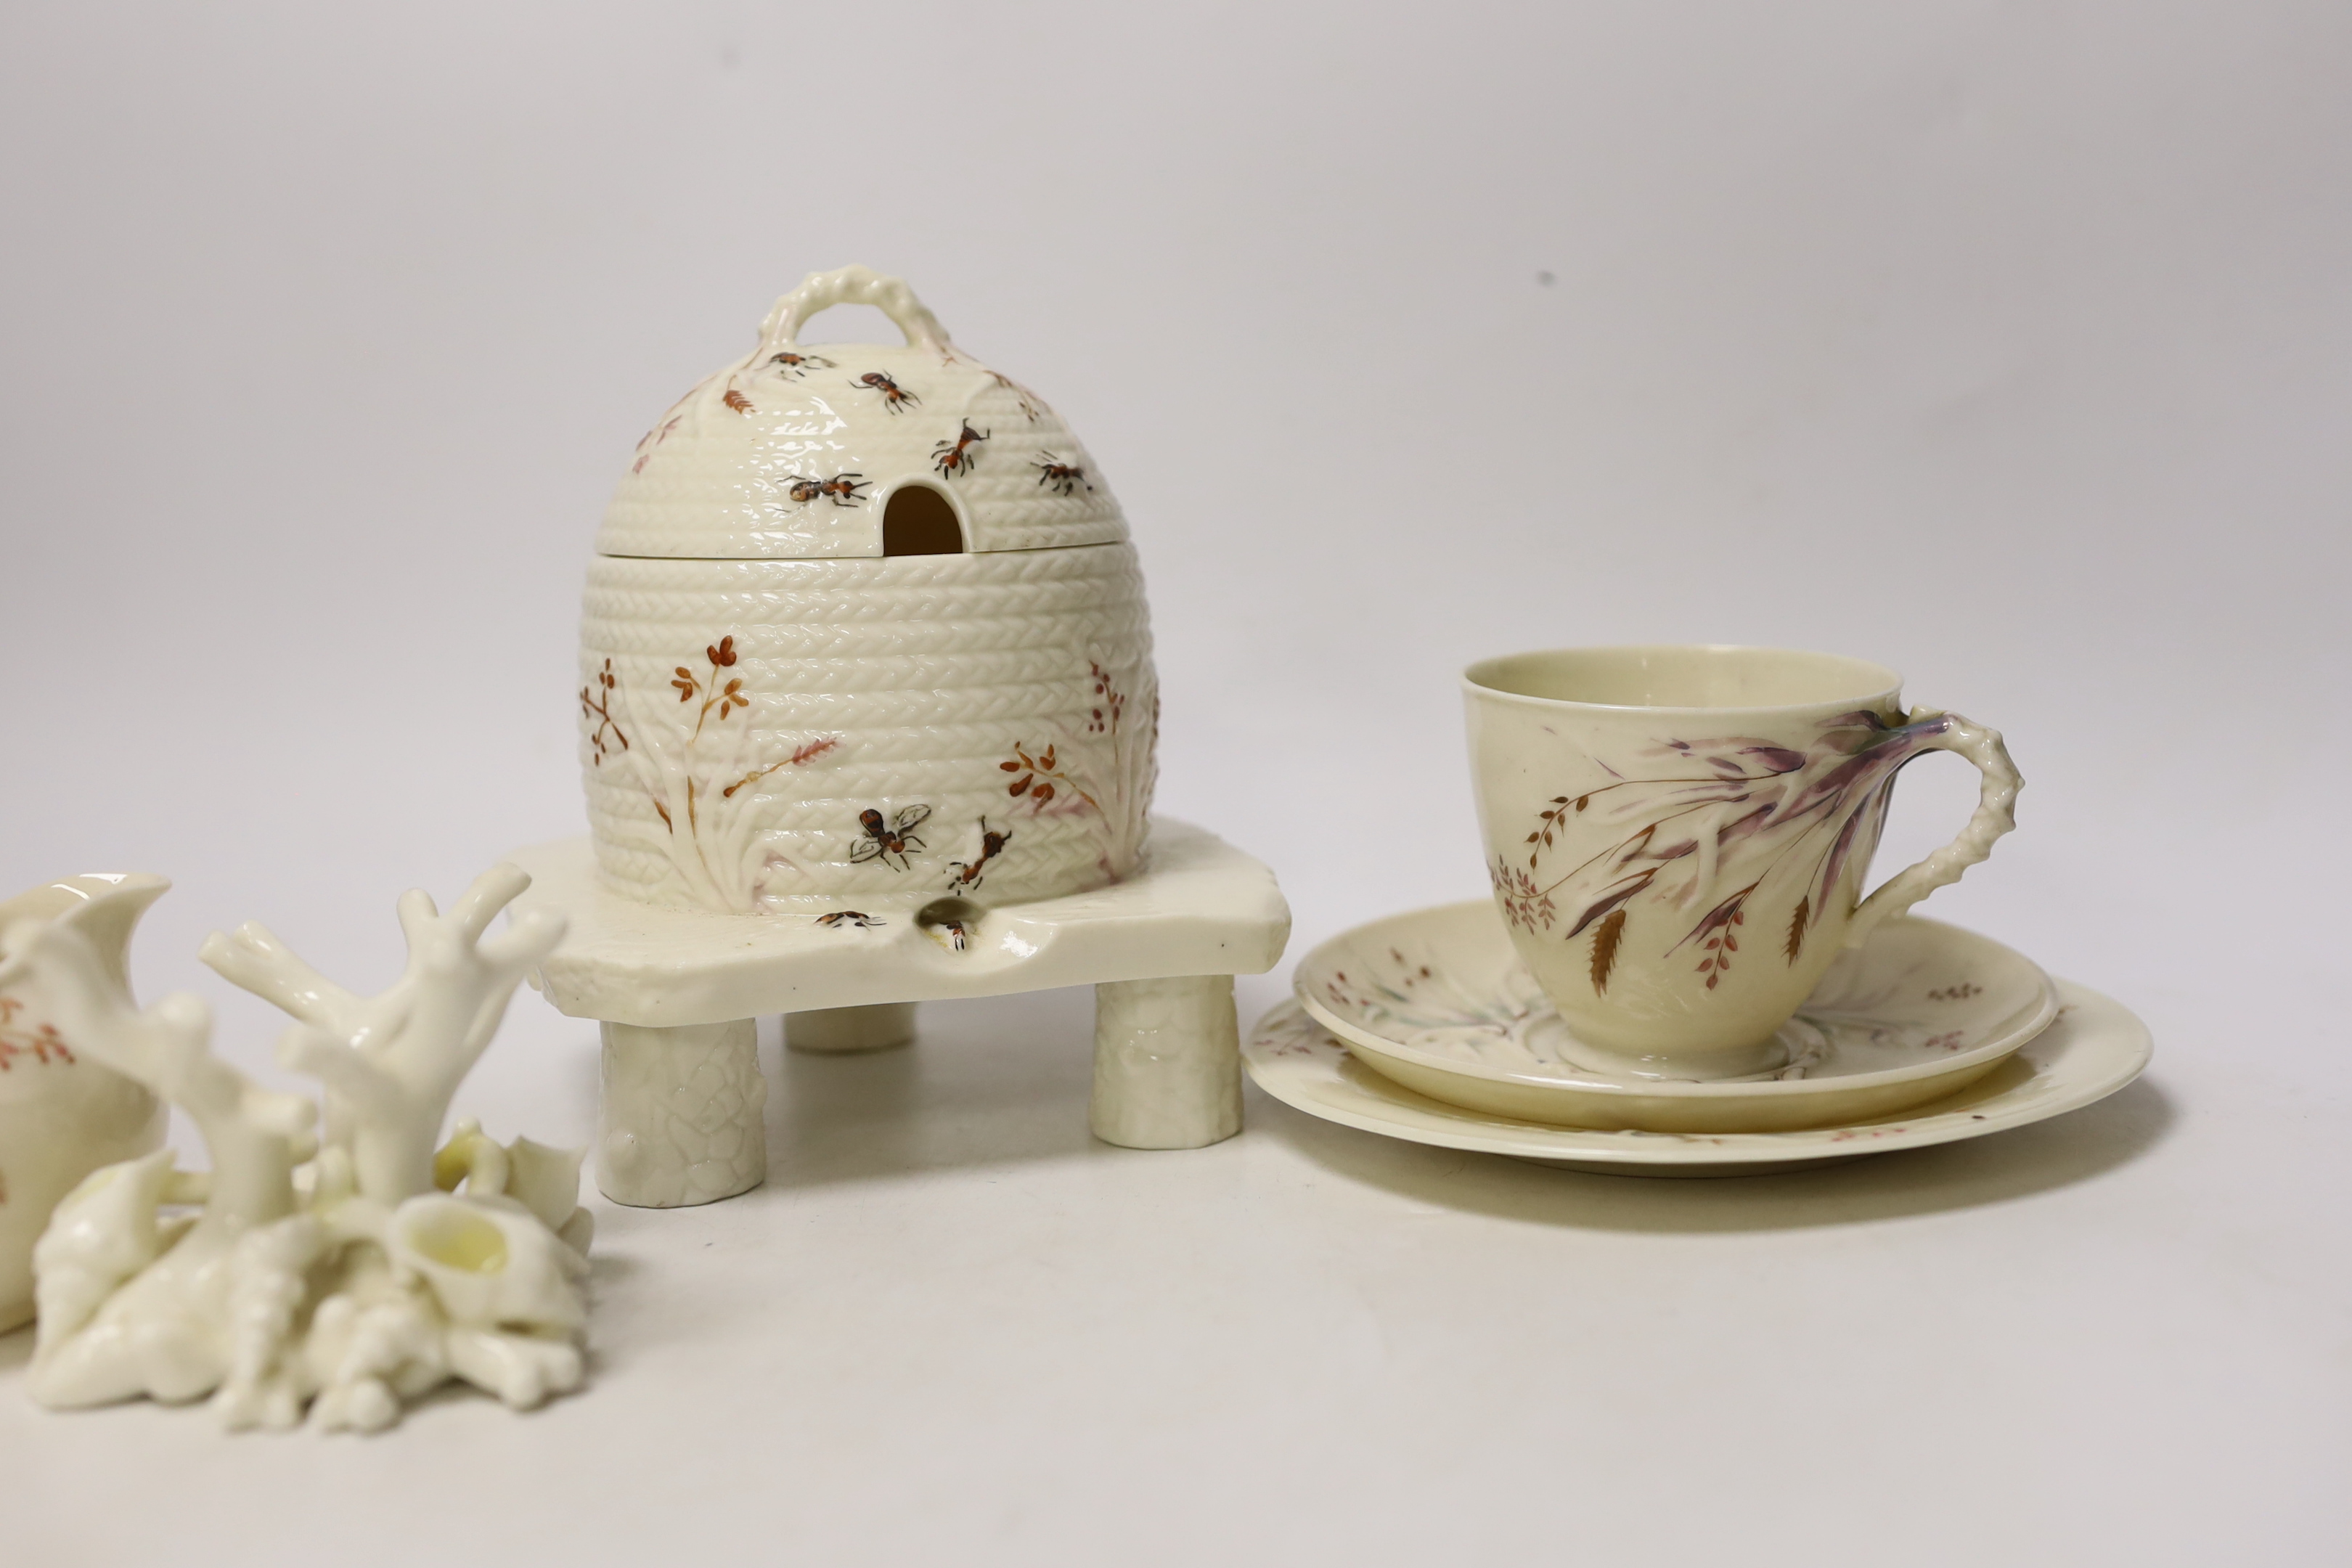 A small quantity of 1st and 2nd period Belleek including a ‘frog’ paperweight and a ‘beehive’ honey jar together with a related reference book by Marion Langham